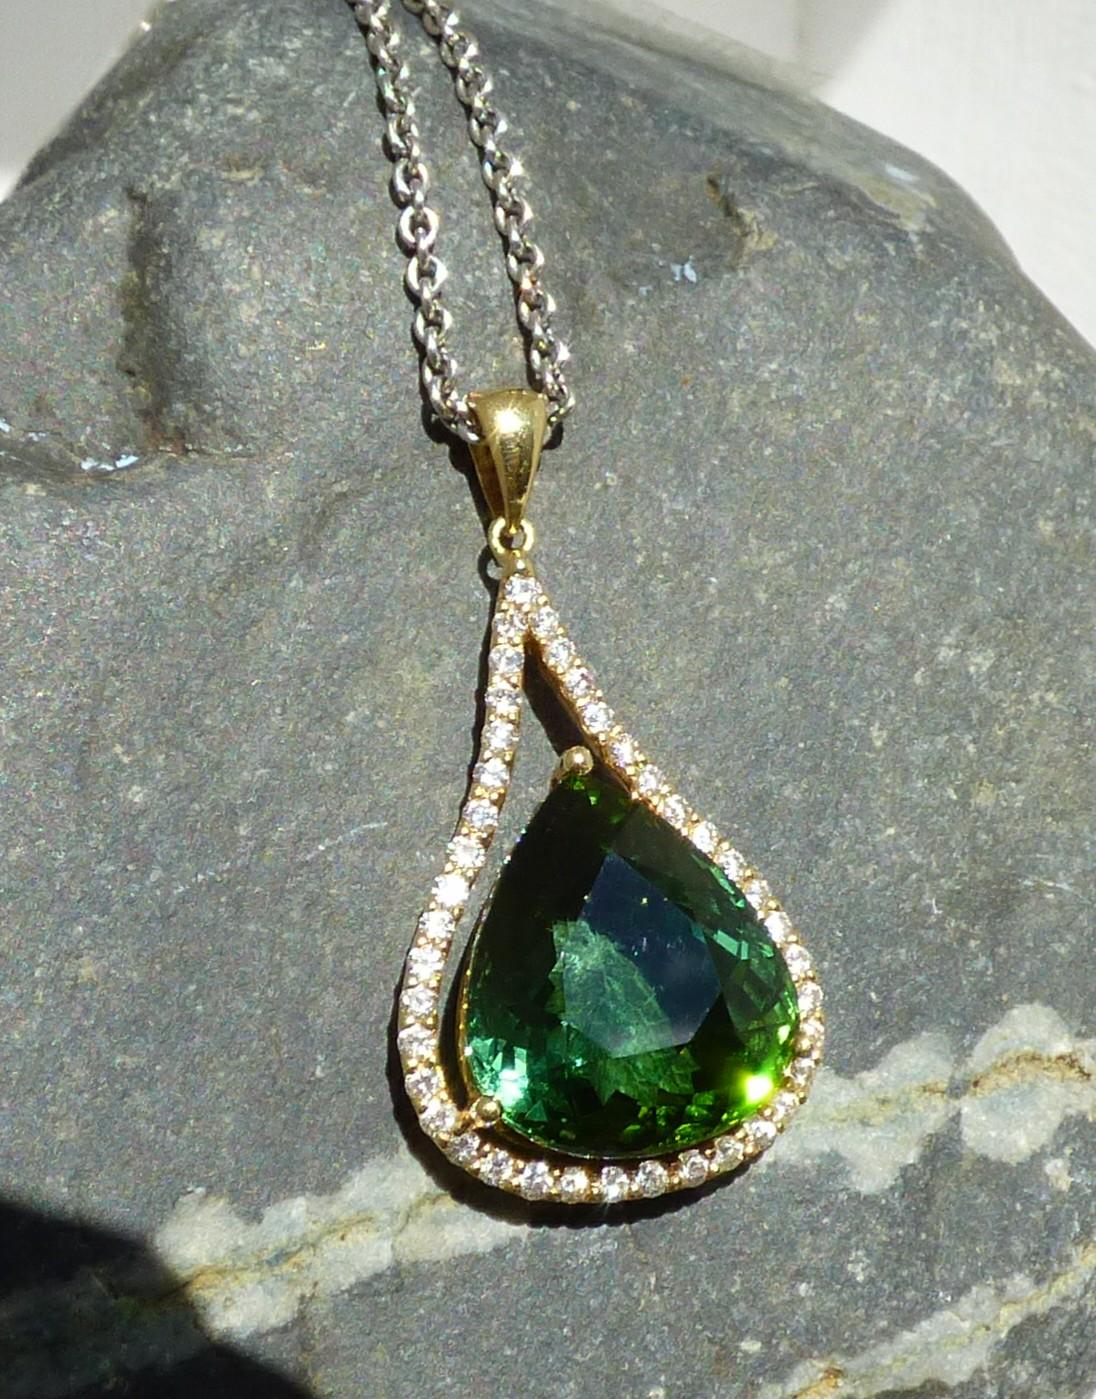 An exquisite 17X15mm pear shaped green Tourmaline (17.82ct.) is set with 40 Diamonds (.81ct.) in a Lapis Jewellers handmade 18K yellow gold pendant. The pendant is hallmarked by the Dublin Assay Office.  This pendant drops from an 18